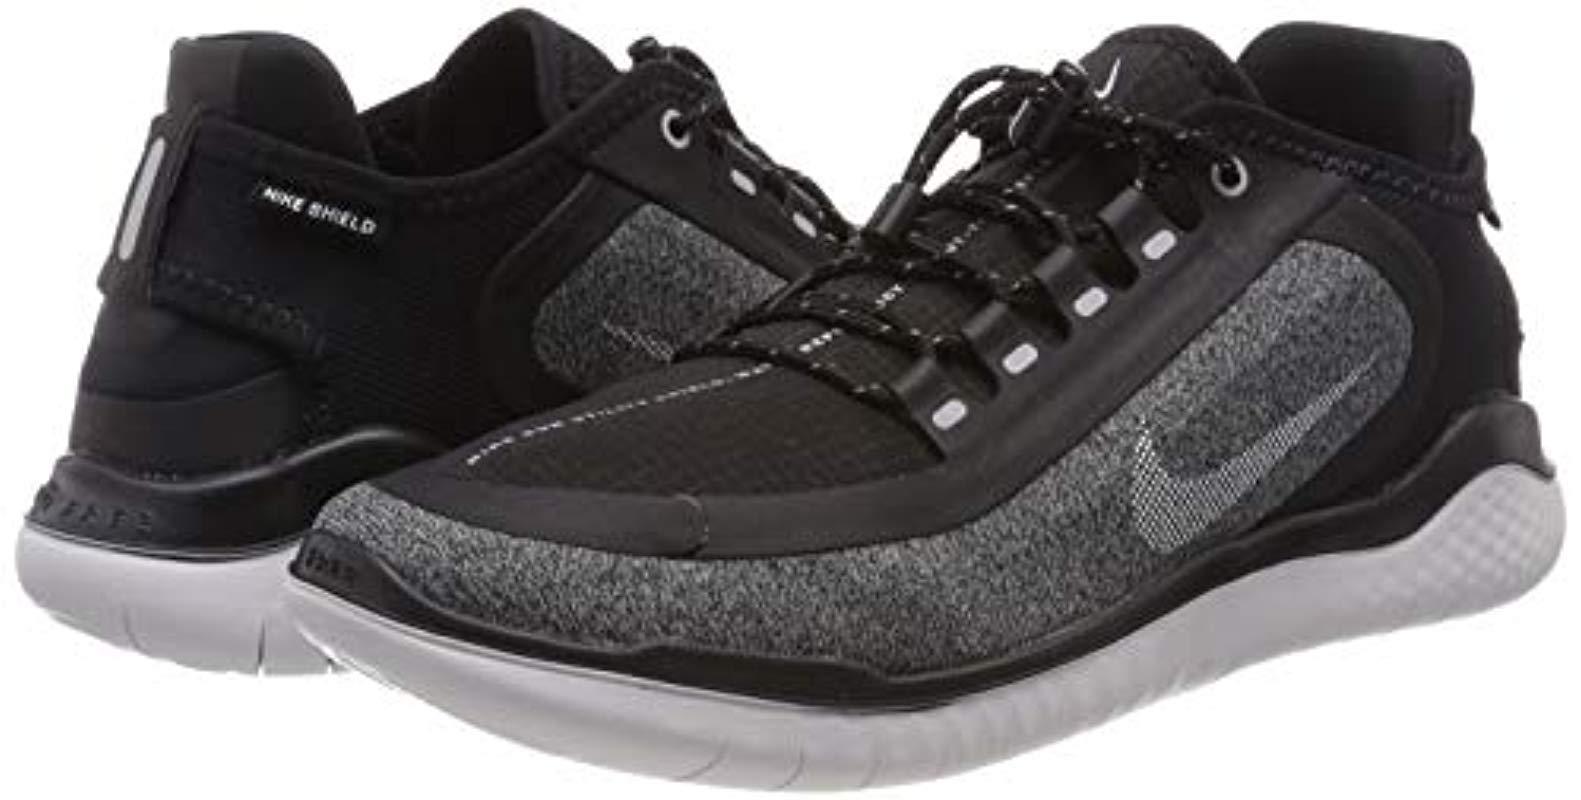 Nike Synthetic Free Rn 2018 Shield Training Shoes in Black for Men - Lyst